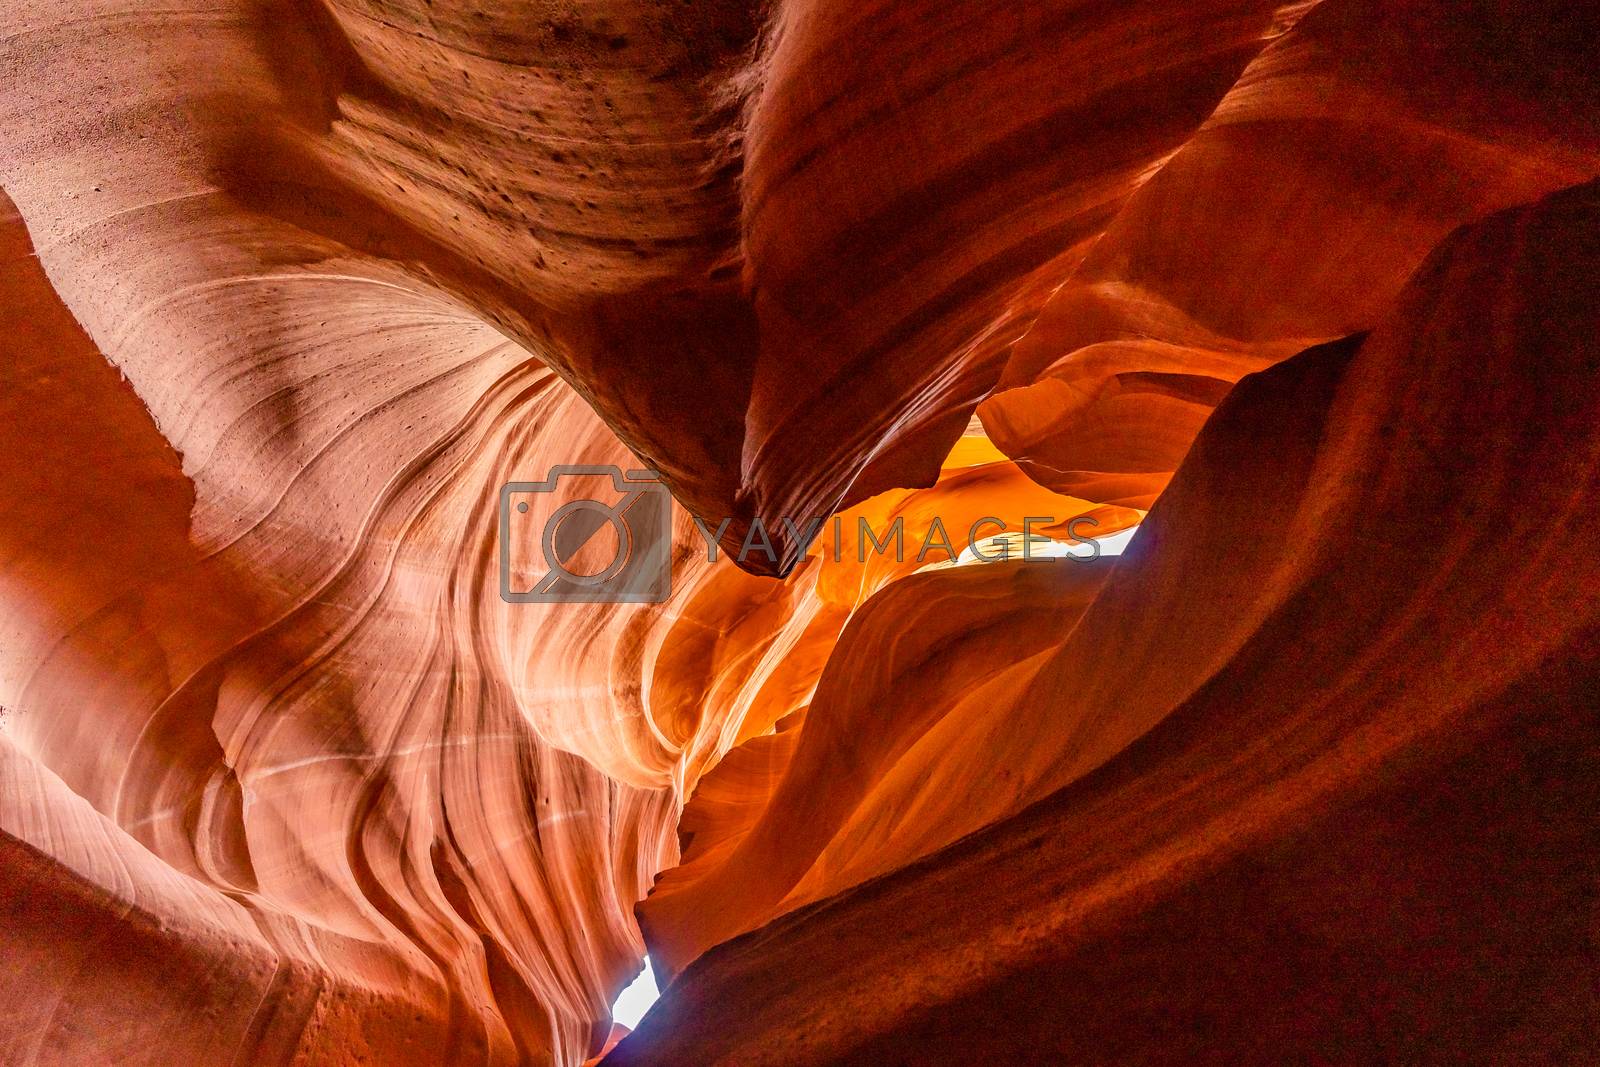 Royalty free image of Lower Antelope Canyon by vichie81